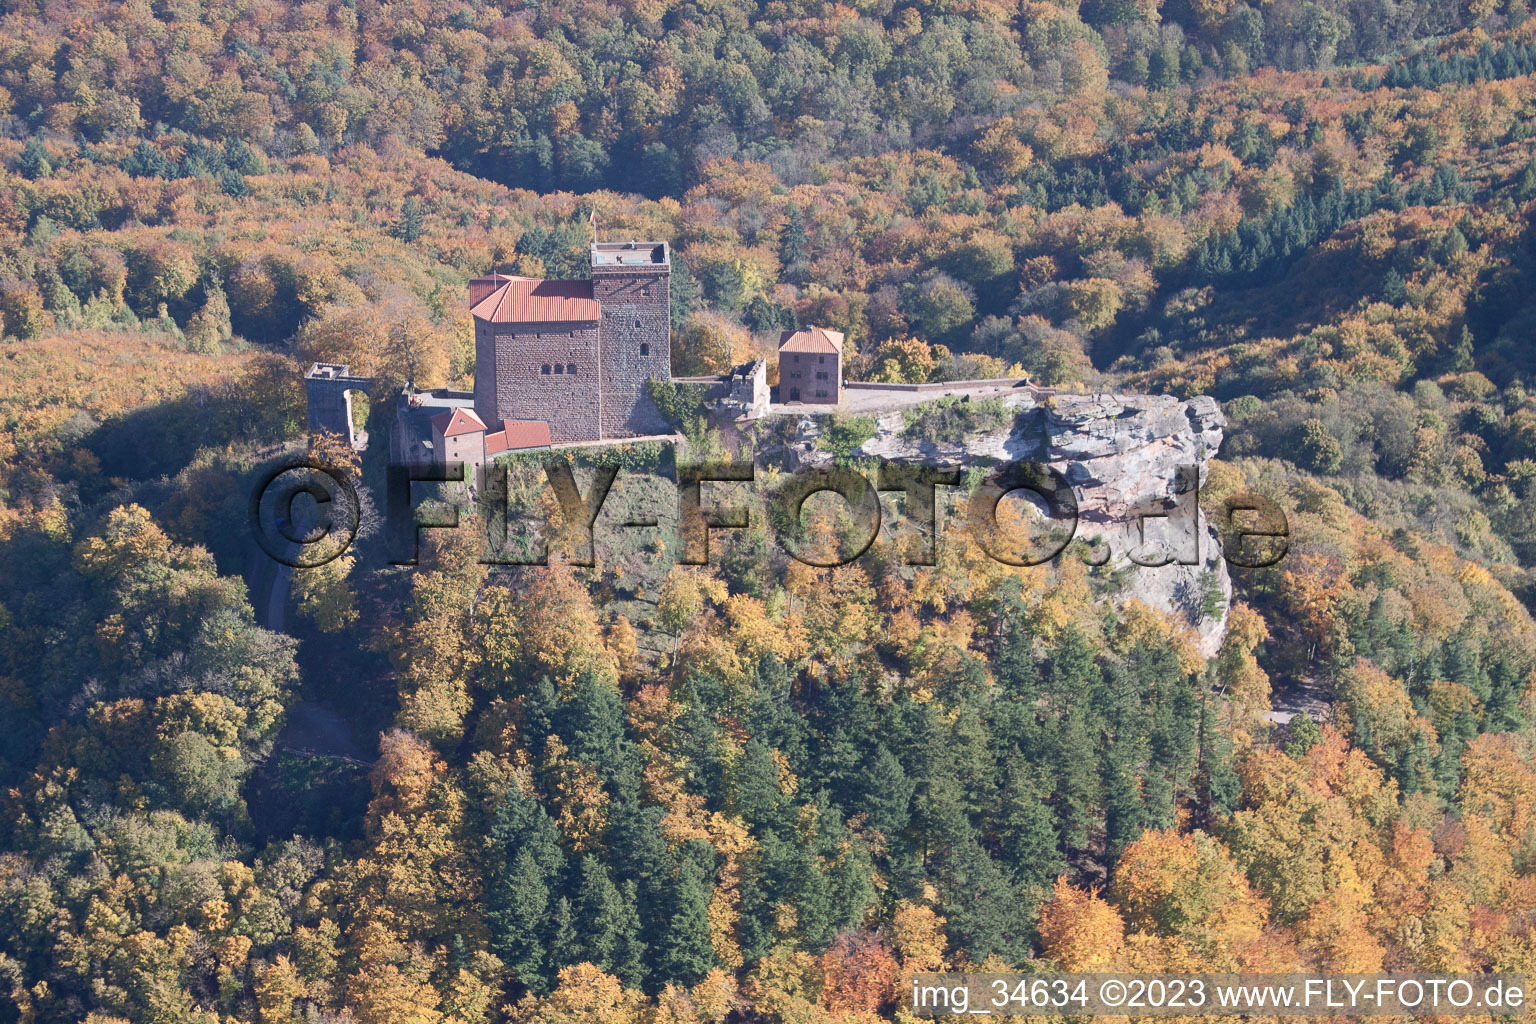 Trifels Castle in Annweiler am Trifels in the state Rhineland-Palatinate, Germany from a drone